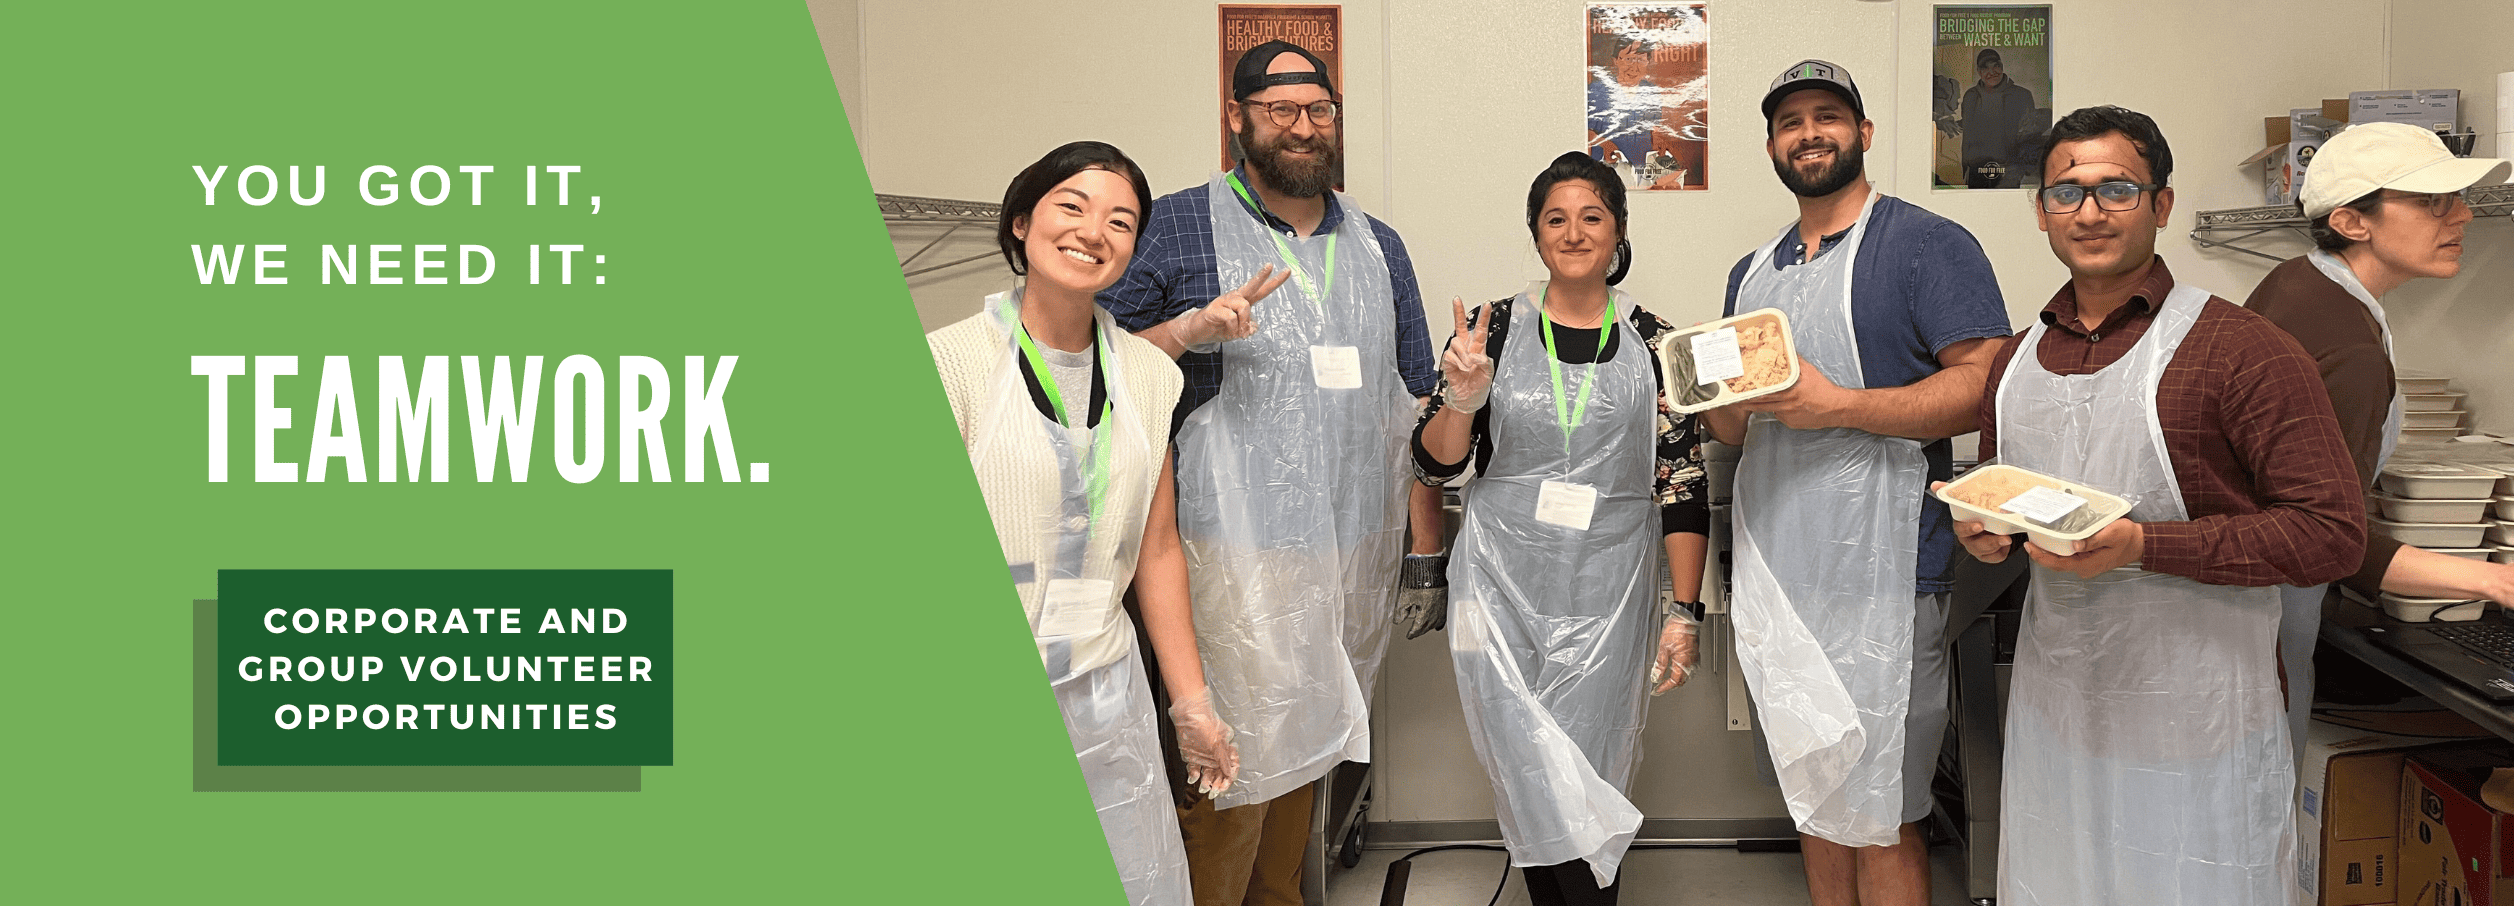 Photo of a group of volunteers in plastic aprons and hair coverings posing with Heat-n-Eats meals, with text for a call-to-action for Group Volunteer Opportunities.